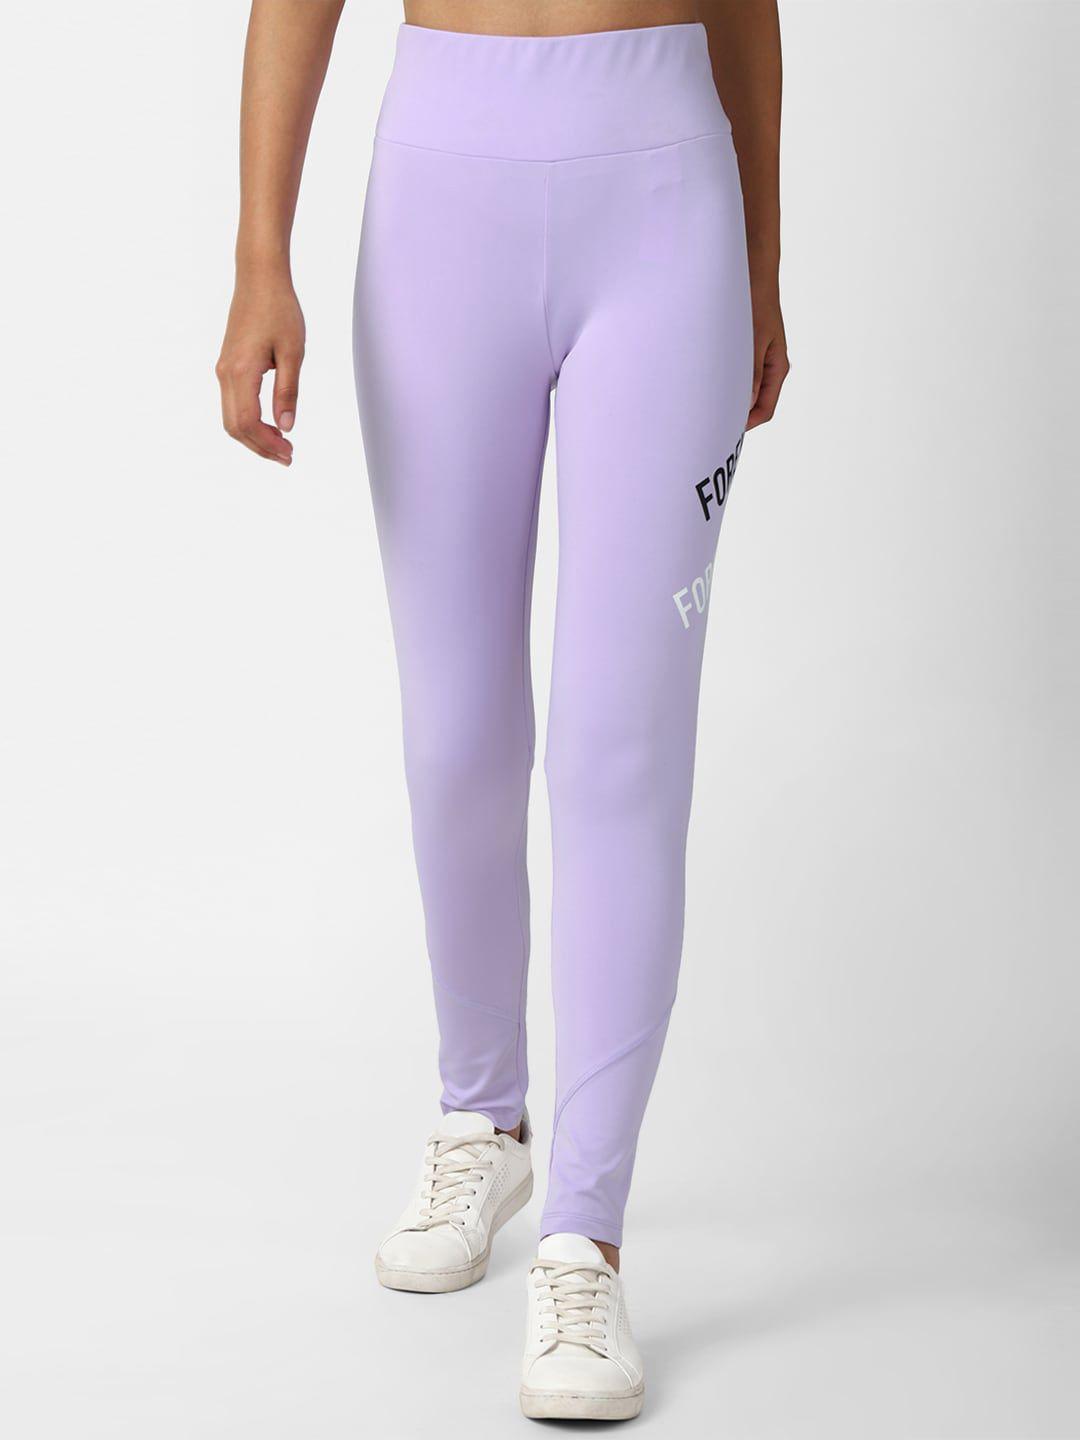 forever-21-women-purple-graphic-tights